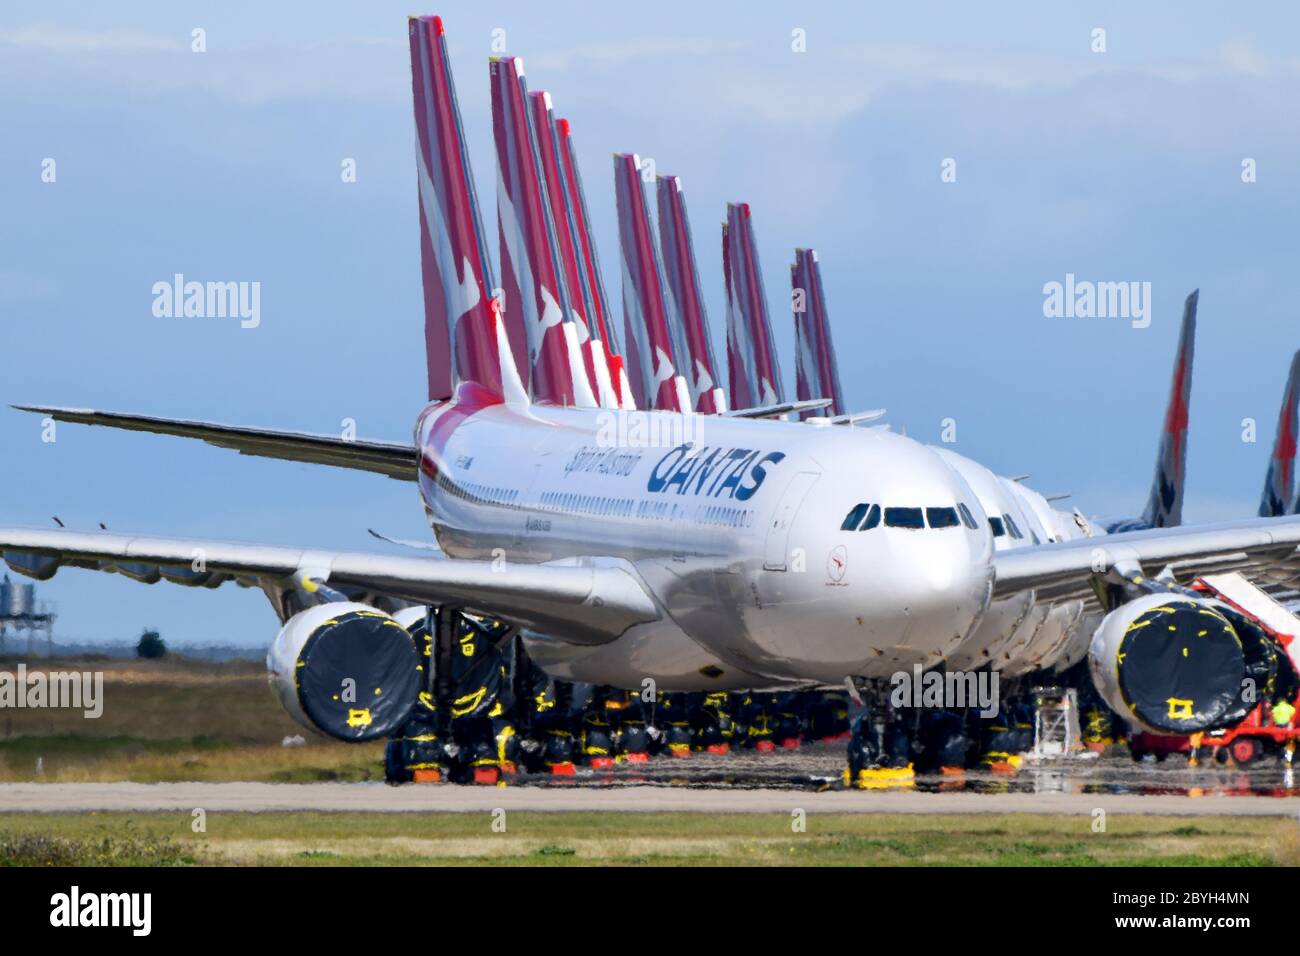 Qantas Planes Parked Up and Grounded on Runway Due to Covid 19 Coronavirus Travel Ban Closed Boarders Stock Photo